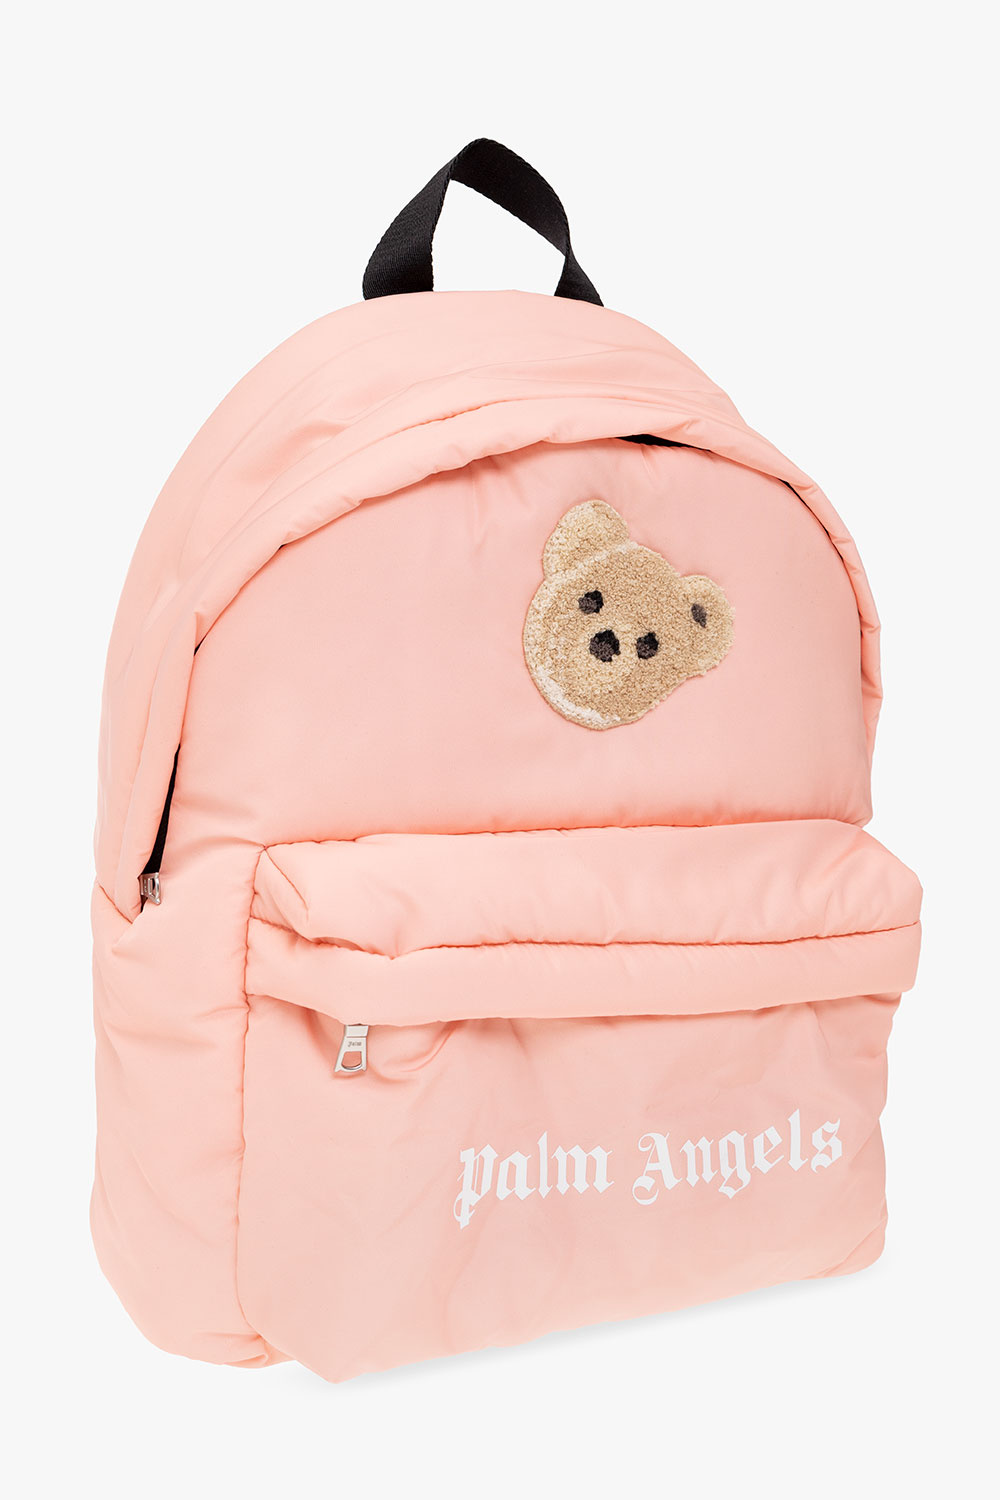 Palm Angels Kids Core Up Backpack Womens